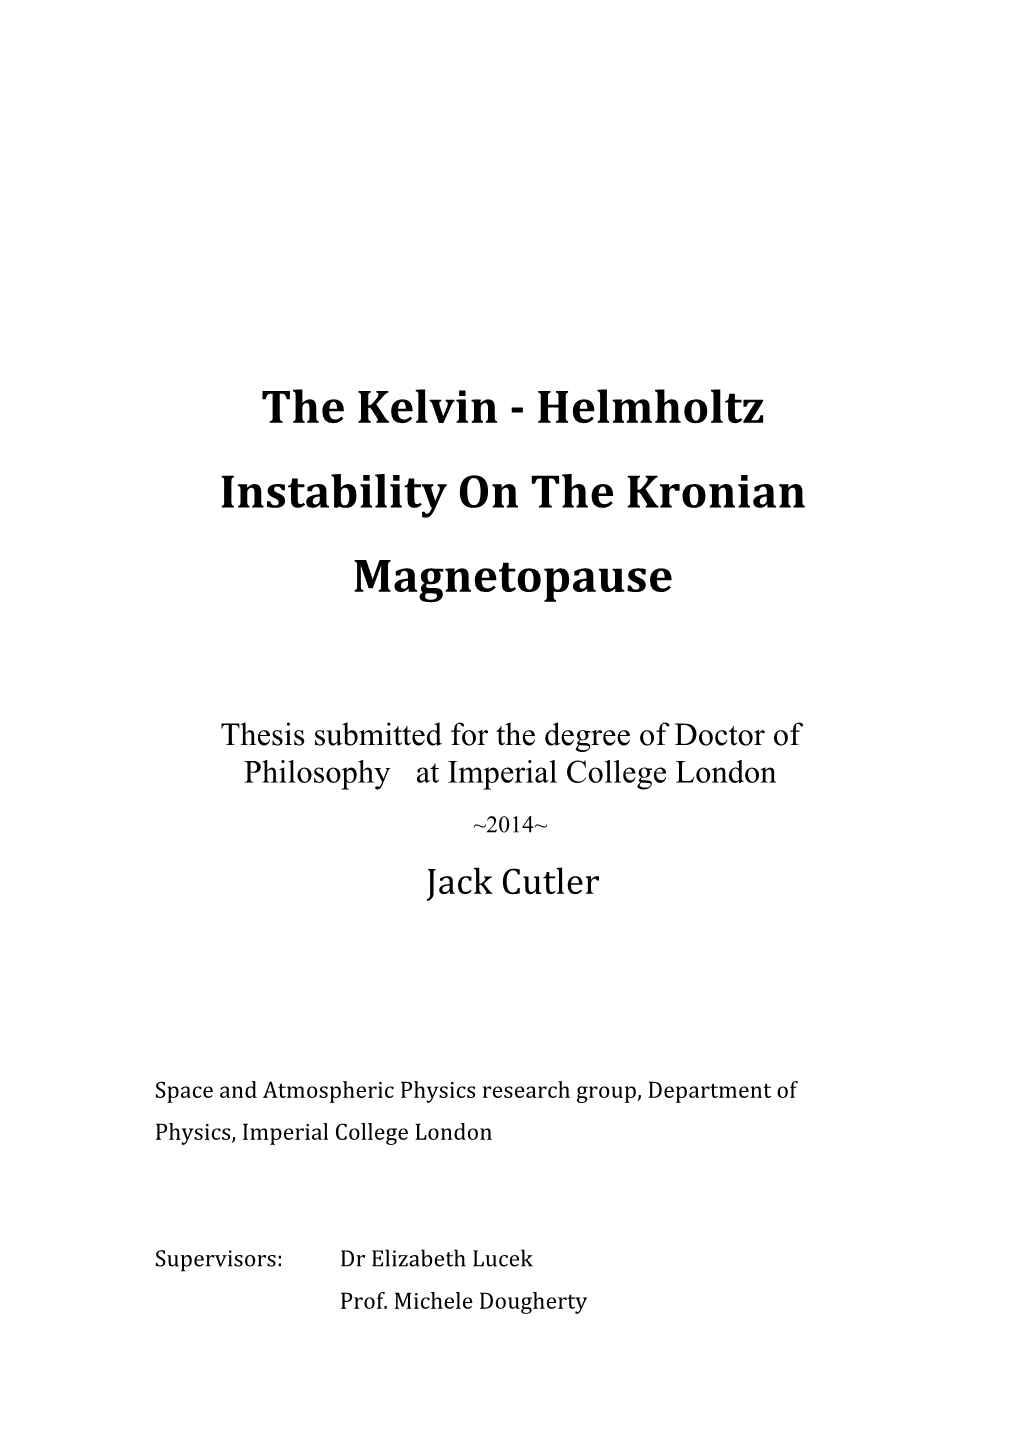 The Kelvin - Helmholtz Instability on the Kronian Magnetopause